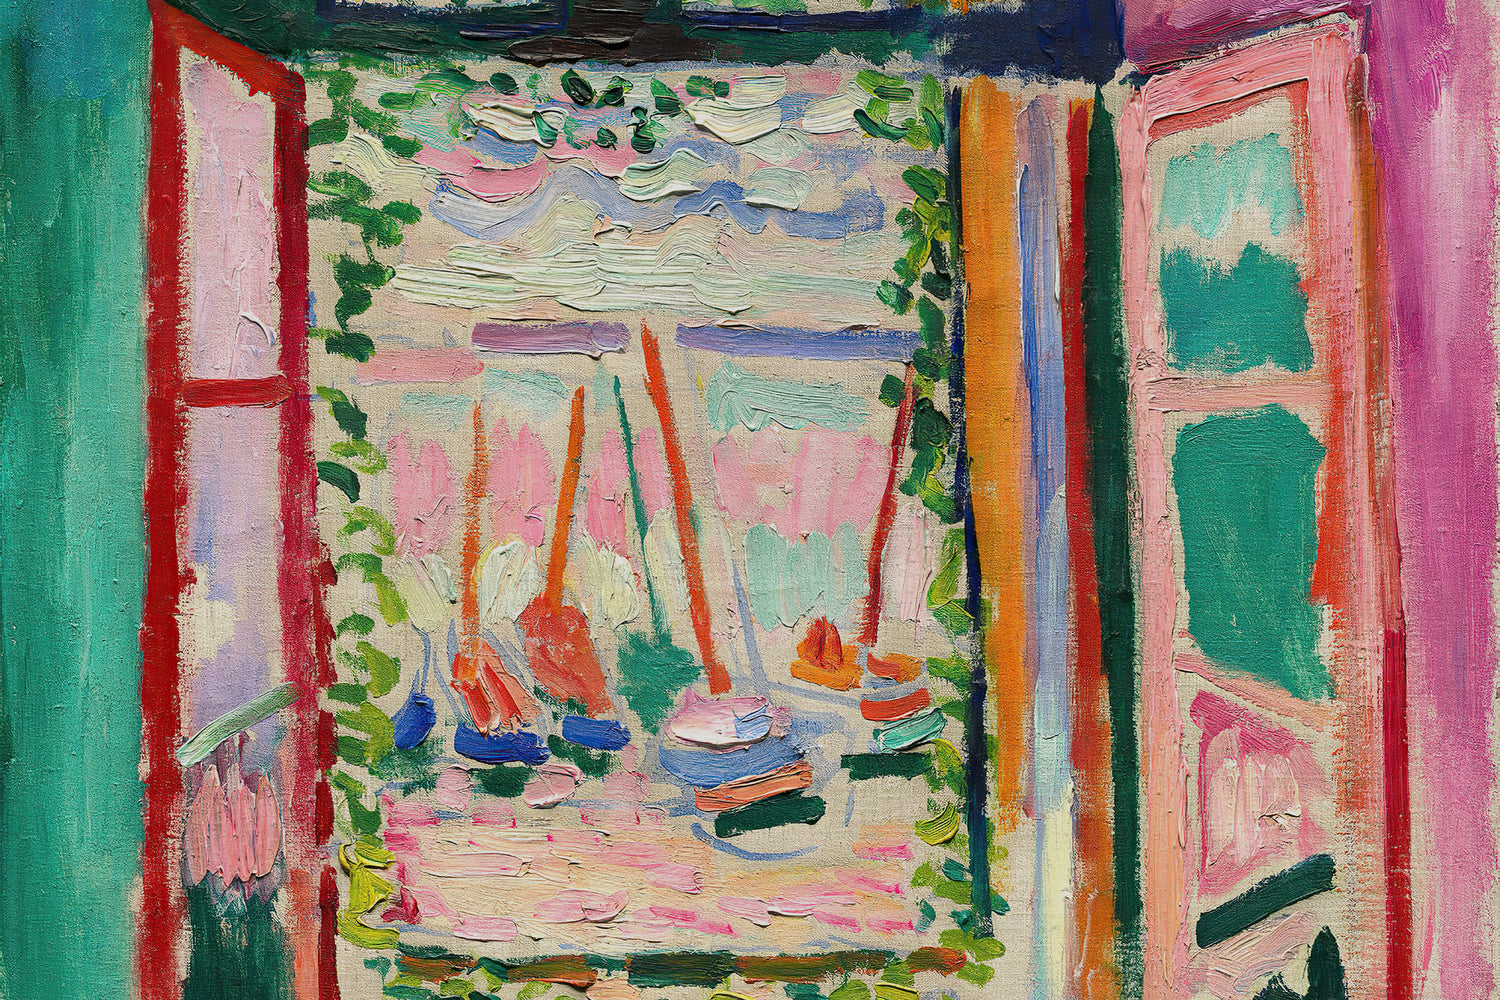 The Open Window by Henry Matisse